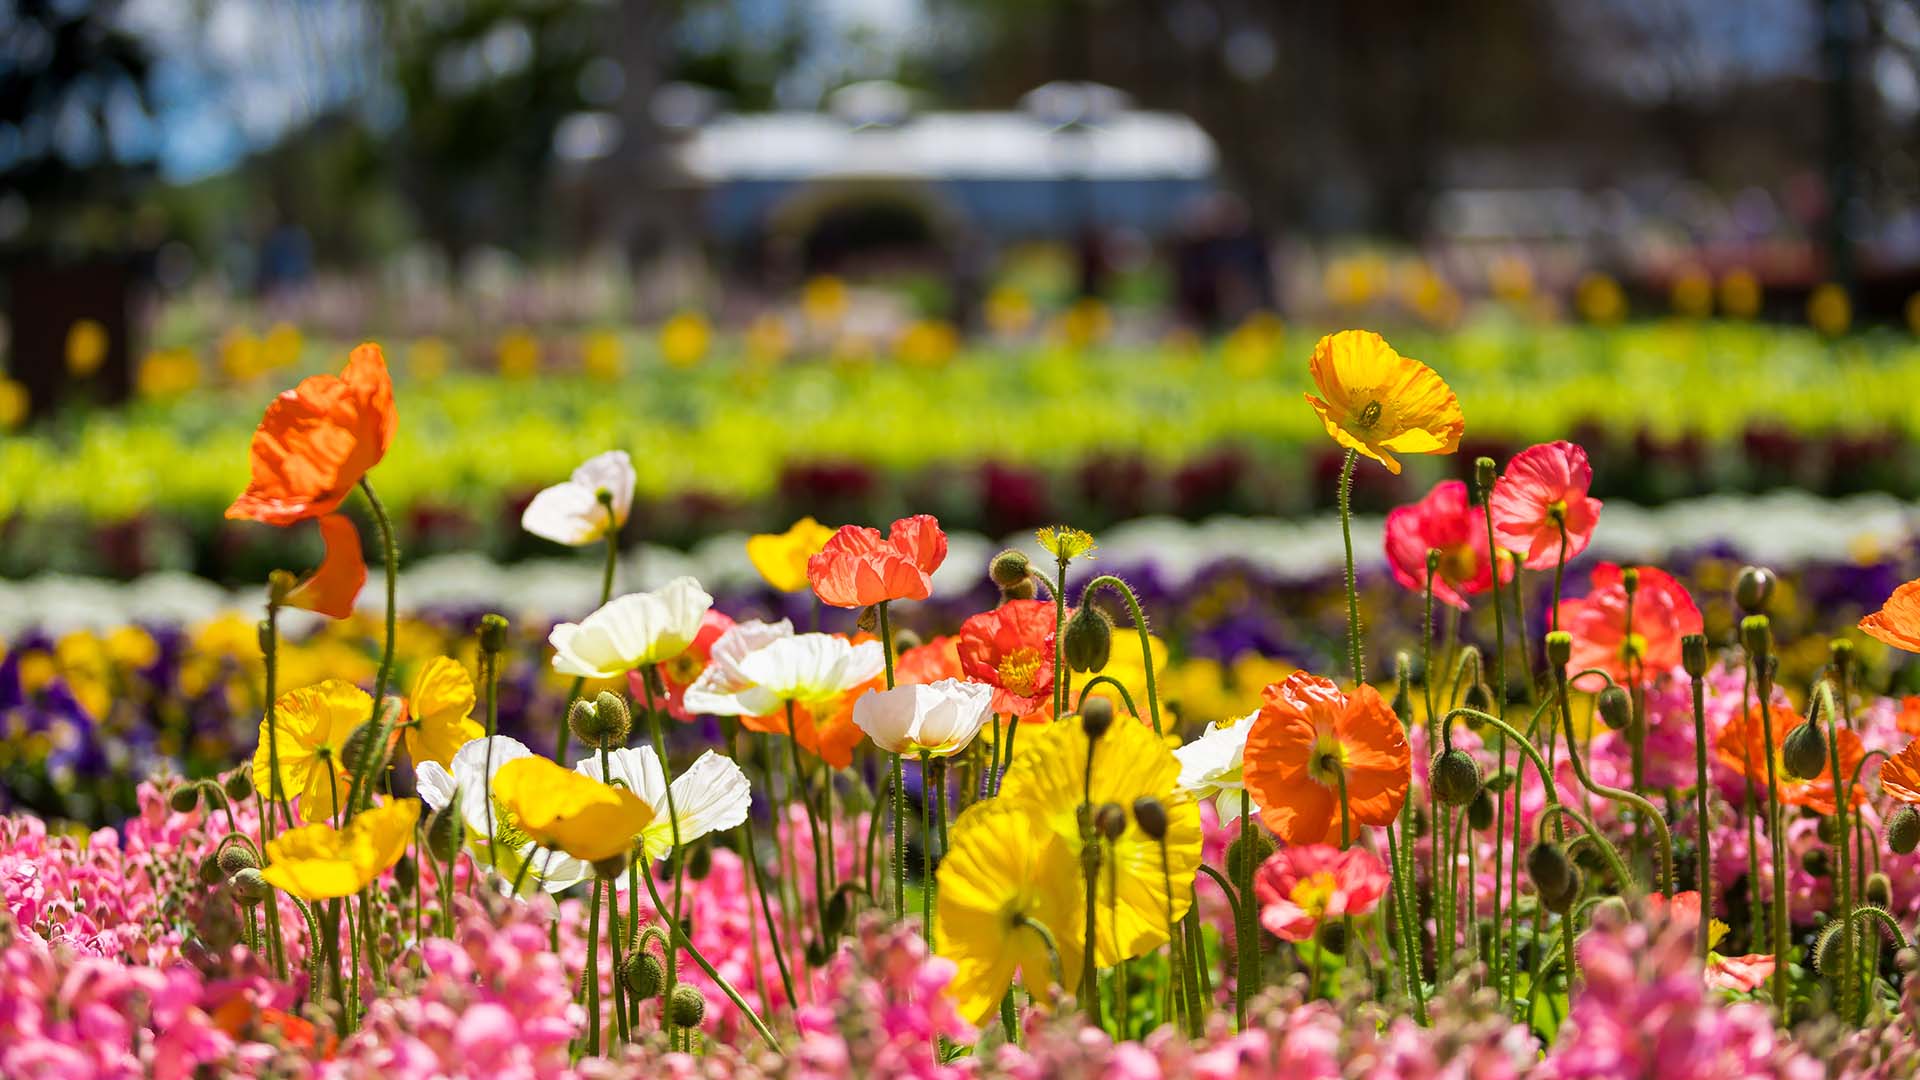 Toowoomba Carnival of Flowers Is Back for 2022 with 190,000 Blooms and a Floral-Inspired Food Trail